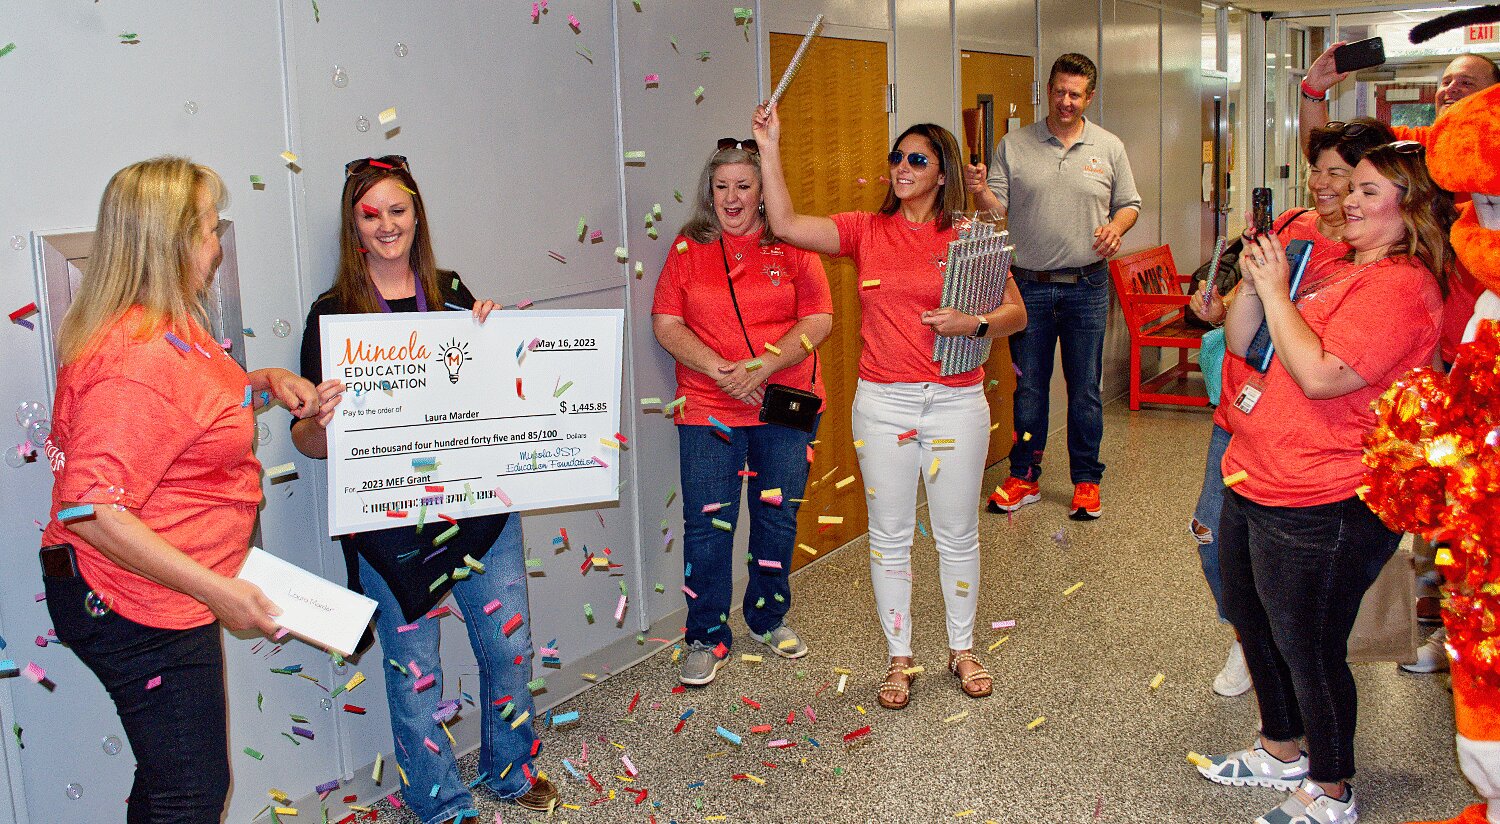 Mineola High School teacher Laura Marder gets a confetti shower as she is awarded a teacher grant from the Mineola ISD Education Foundation during the annual prize patrol Friday.